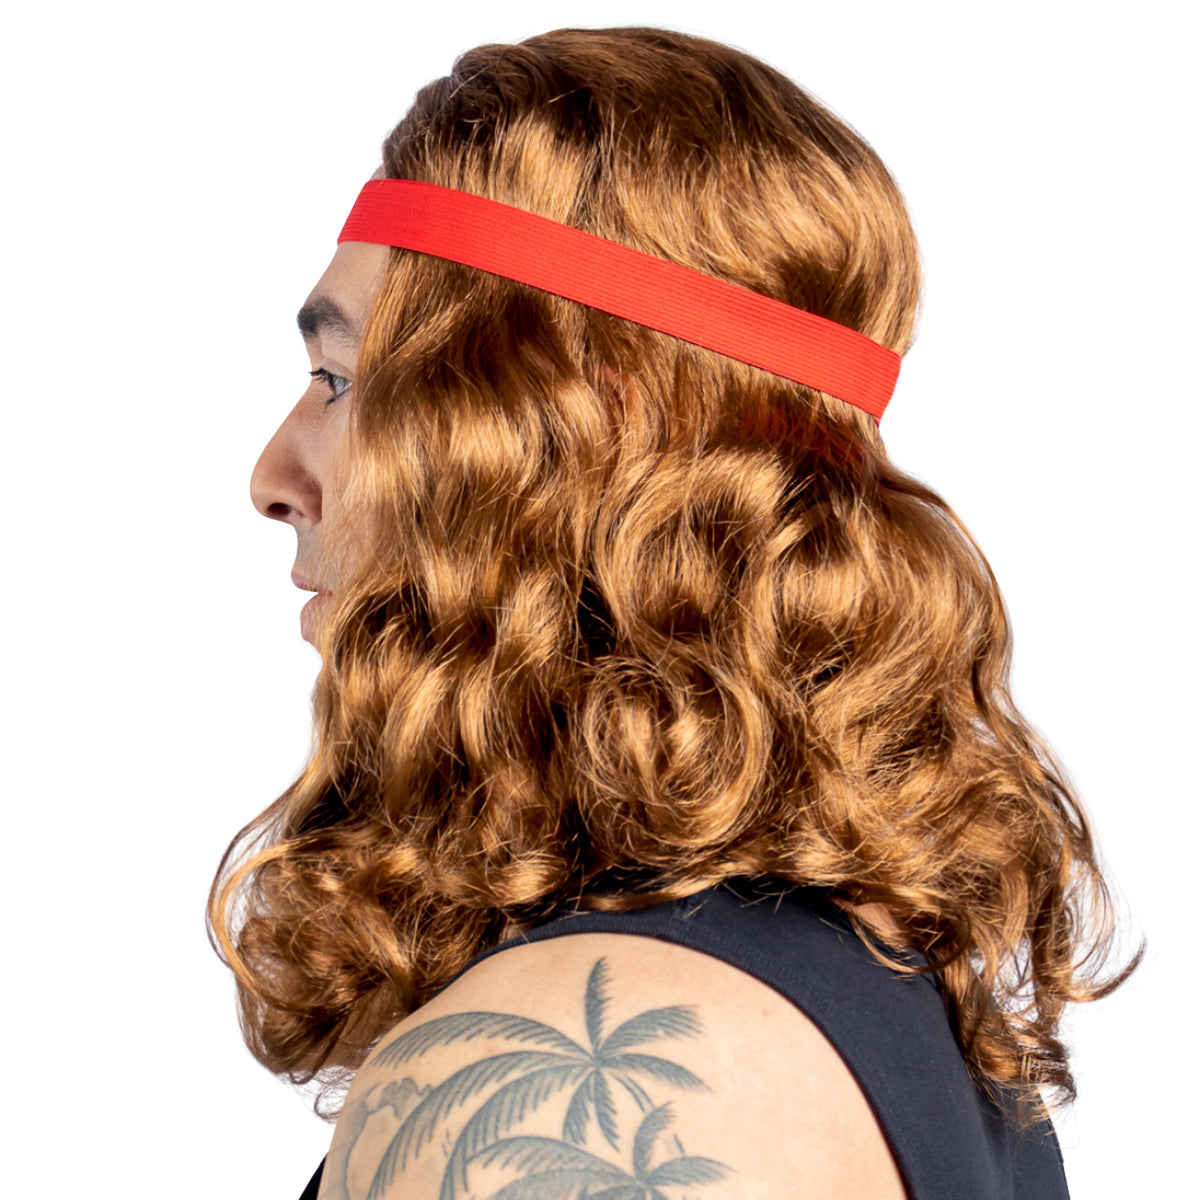 ANXIN WIG FACTORY Costume Accessories Cool Dude with Headband Wig for Adults 810077656655